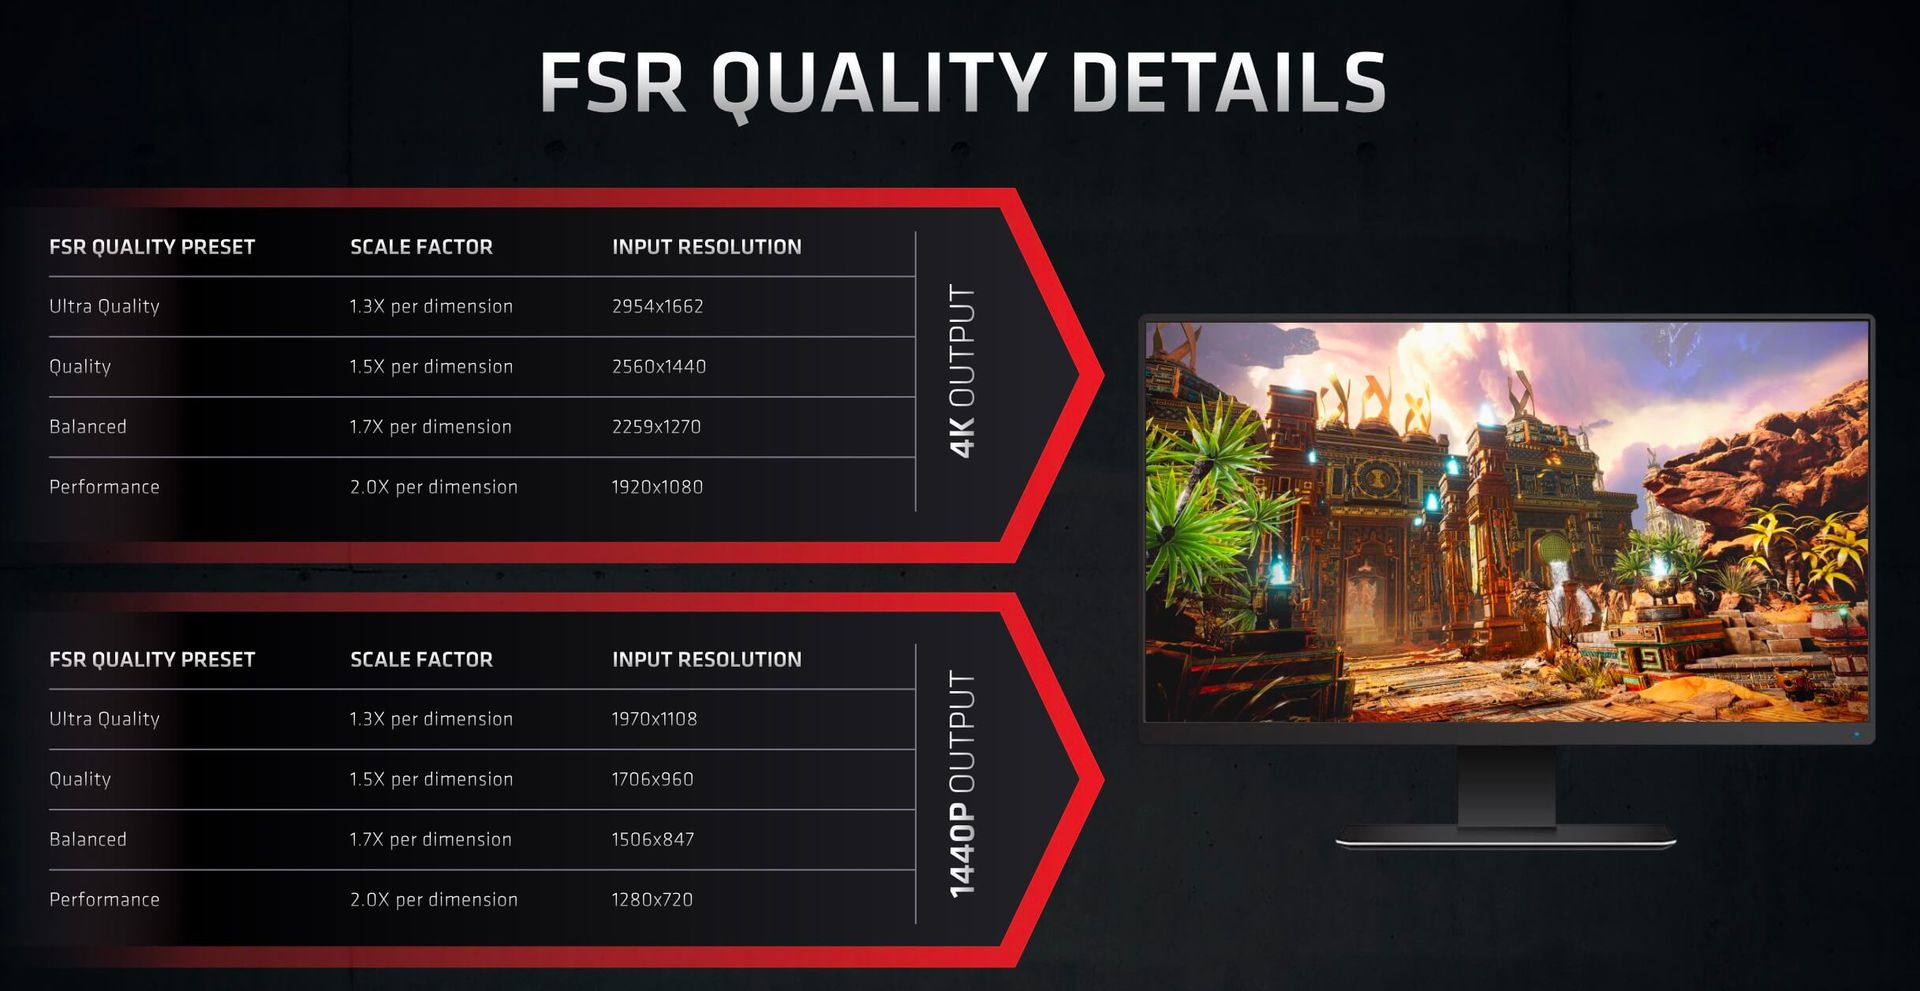 AMD FSR quality and scaling details